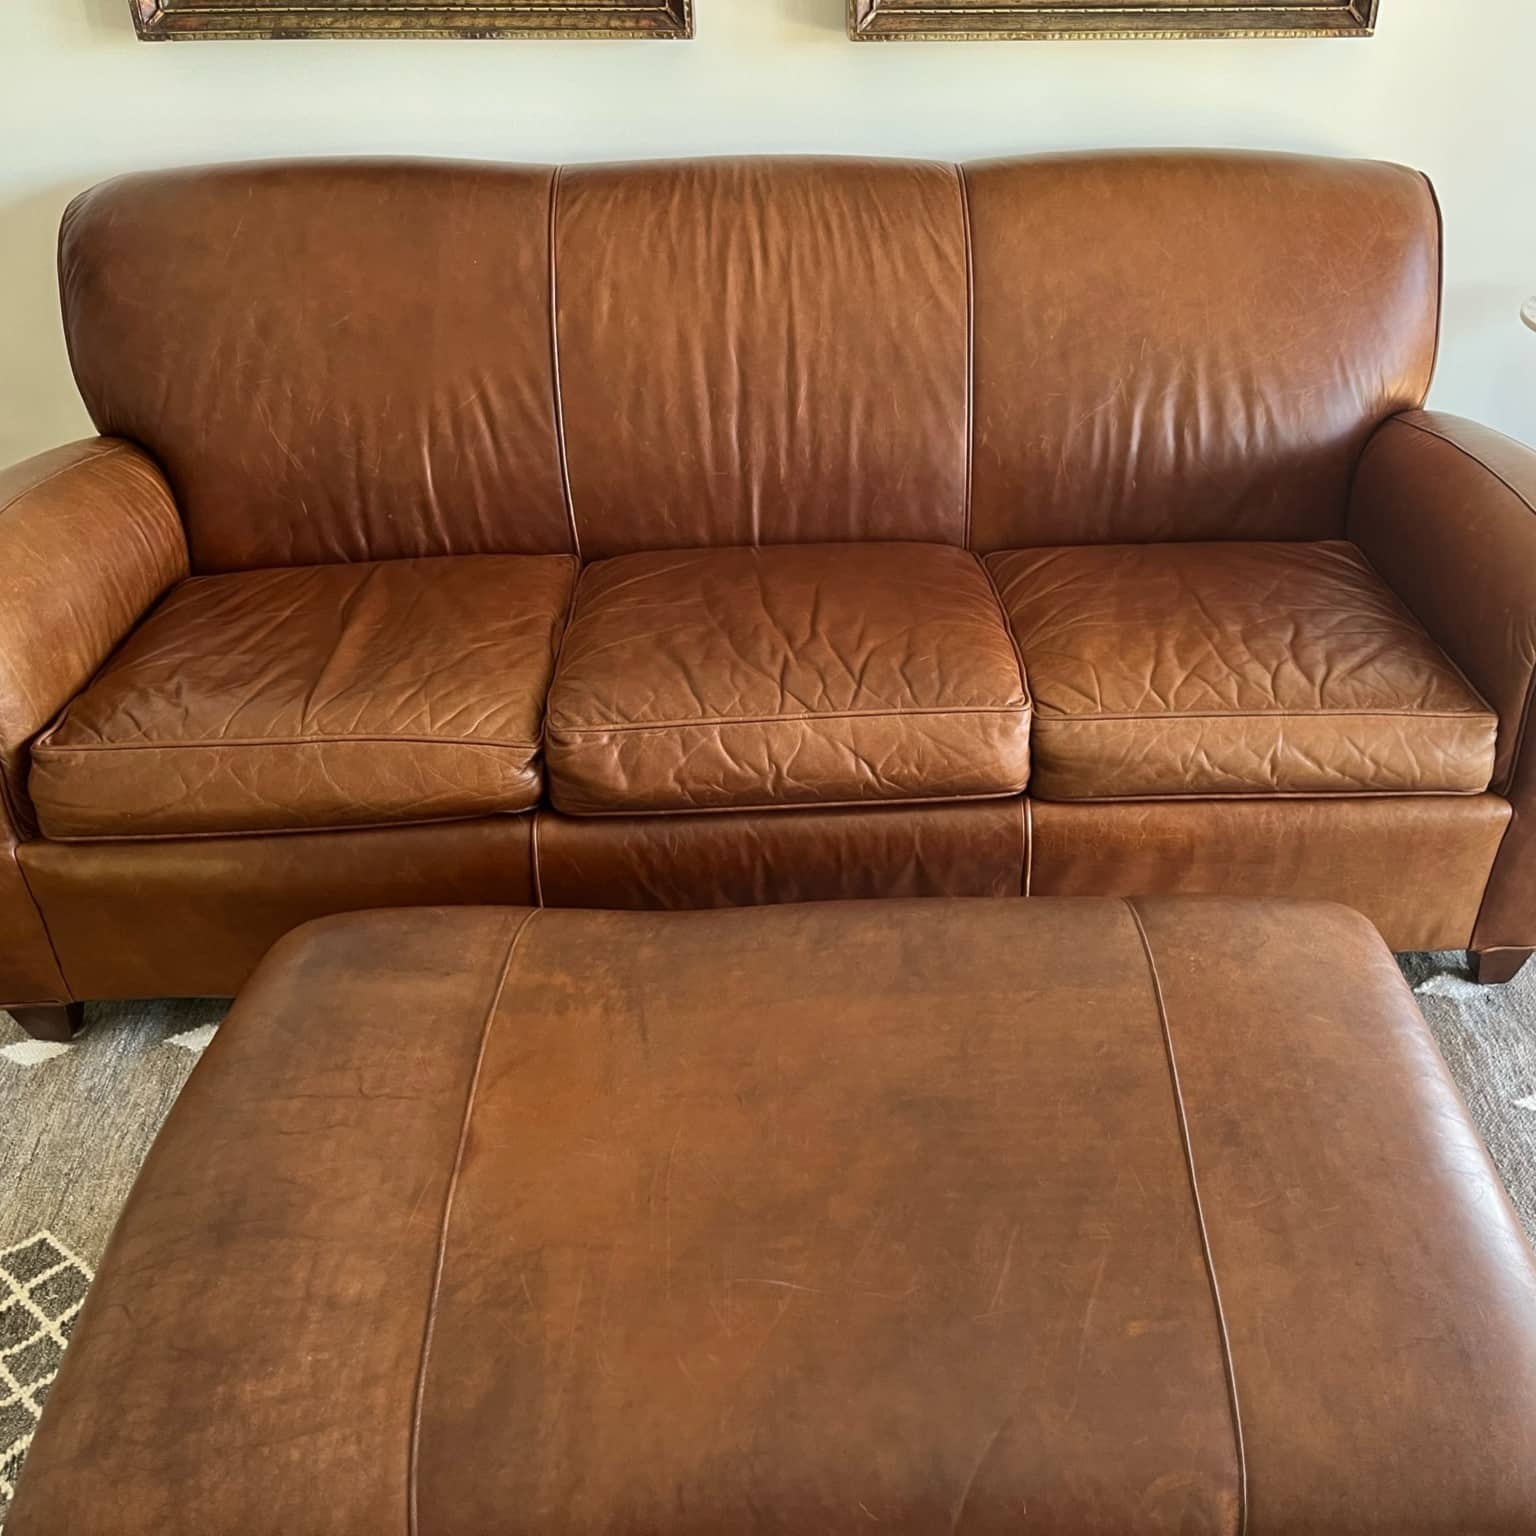 restored leather sofa after cleaning and conditioned